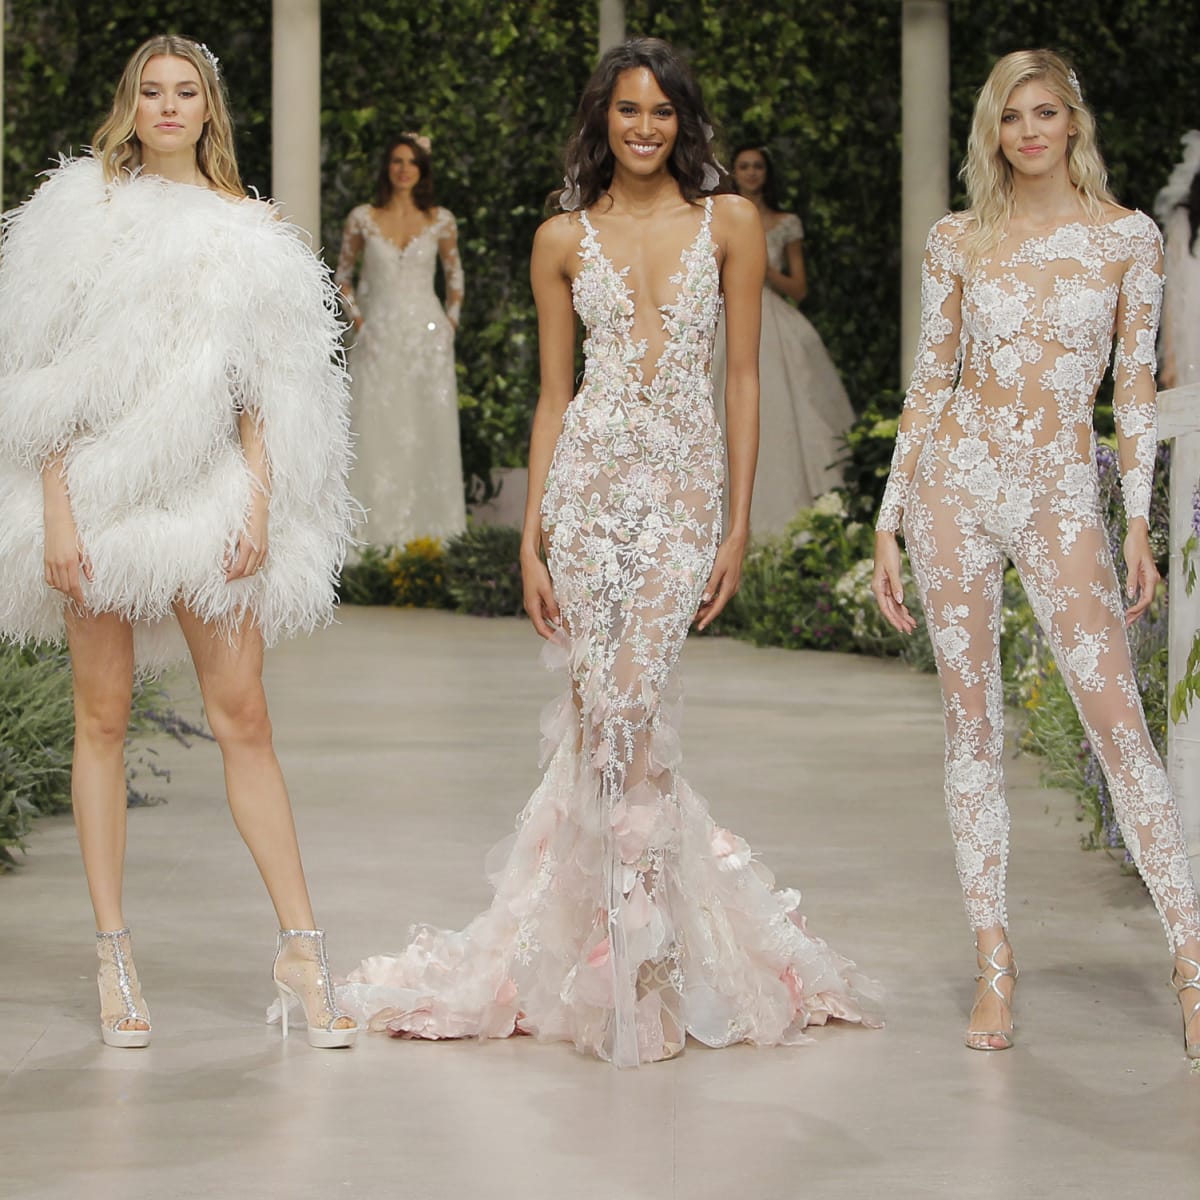 With Pronovias, you can transform your wedding dress and wear it